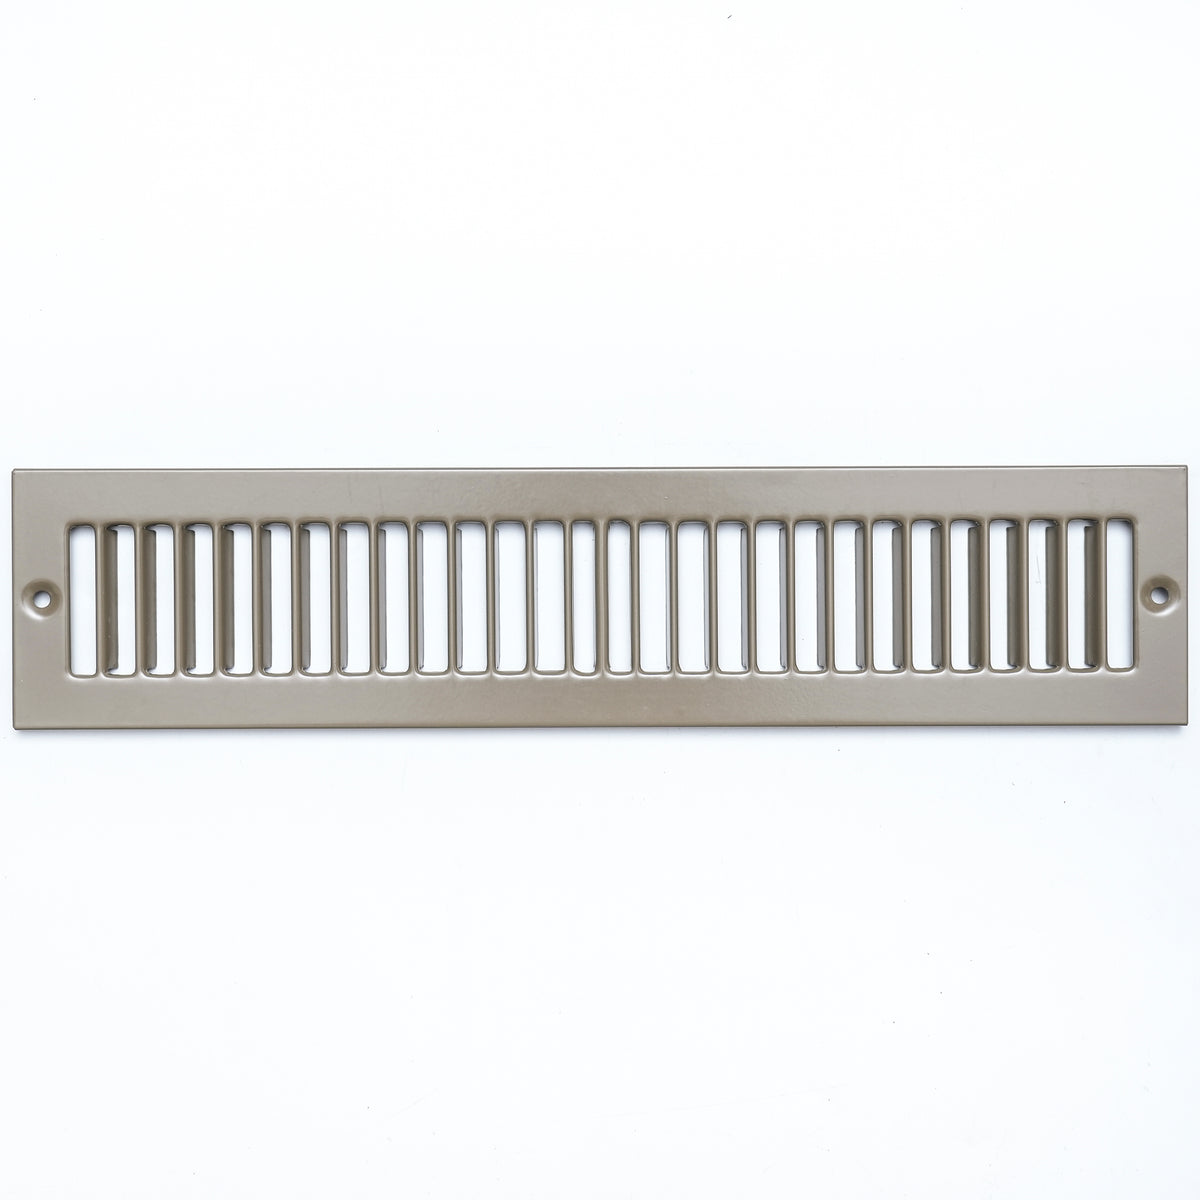 airgrilles 2" x 14" toe kick register grille   vent cover   outer dimensions: 3.5" x 15.5"   brown hnd-tgs-br-2x14  - 1